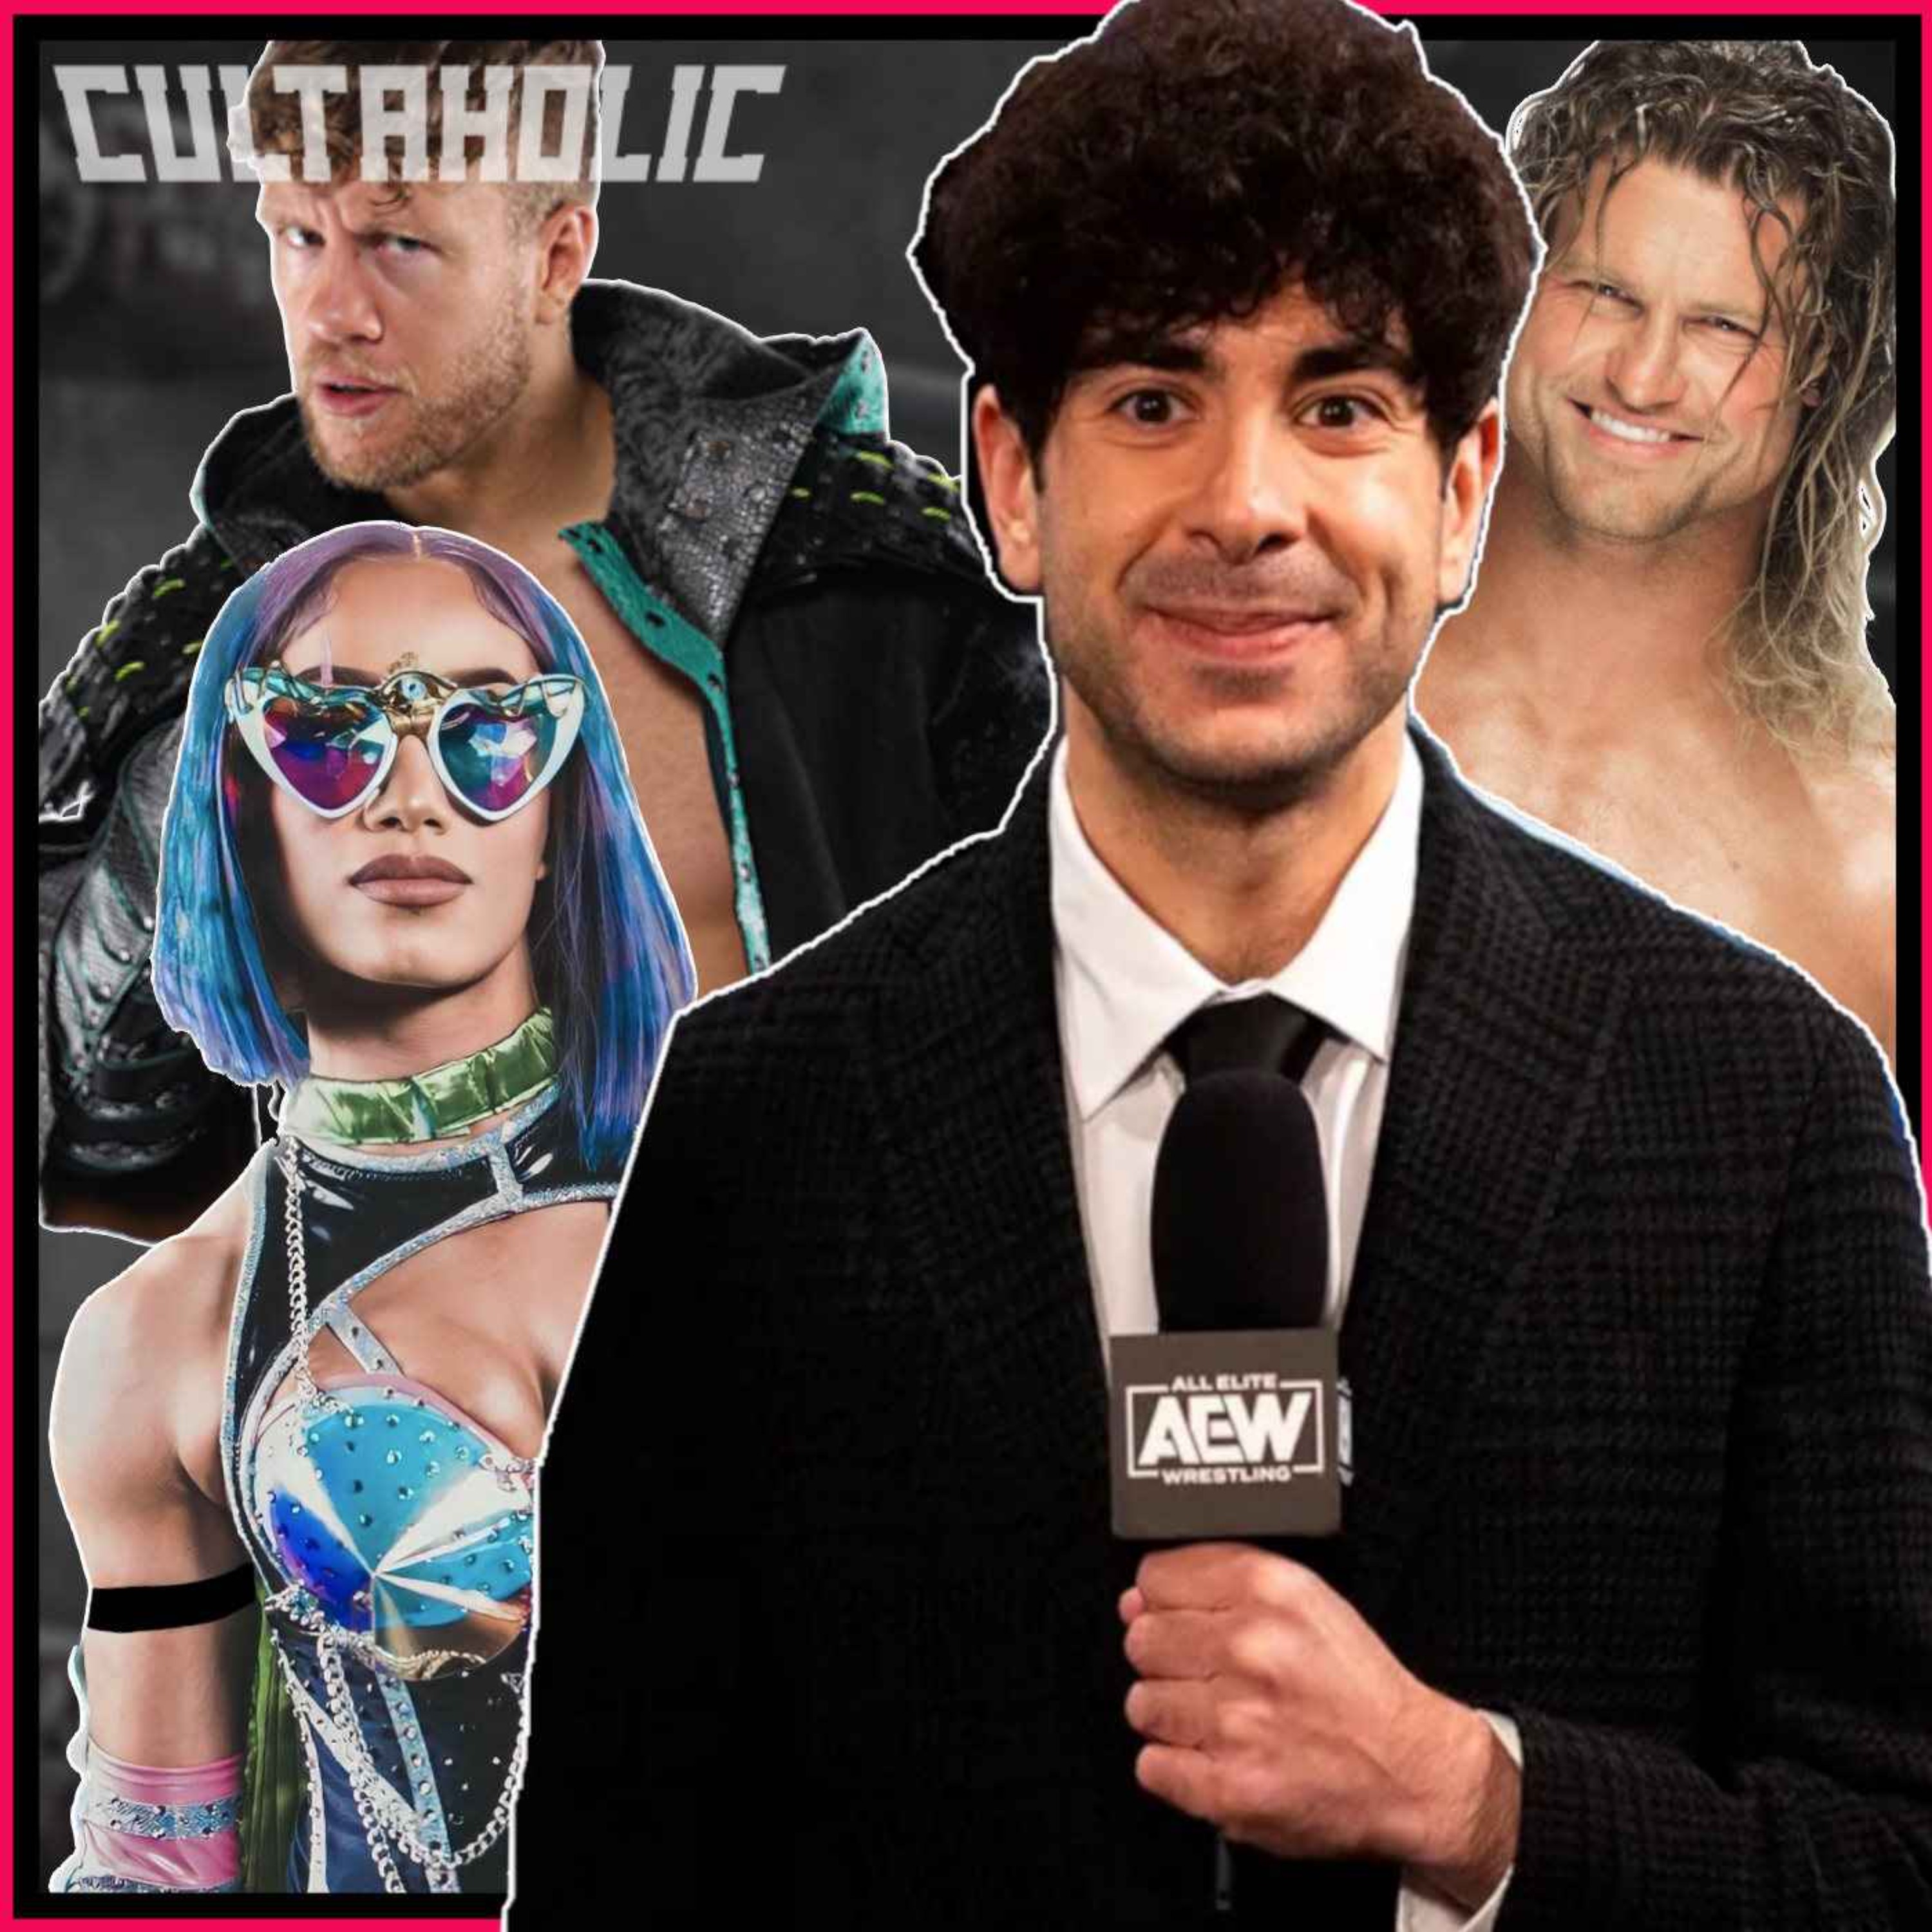 NEWS: Tony Khan Confirms MAJOR STAR Signing With AEW At FULL GEAR